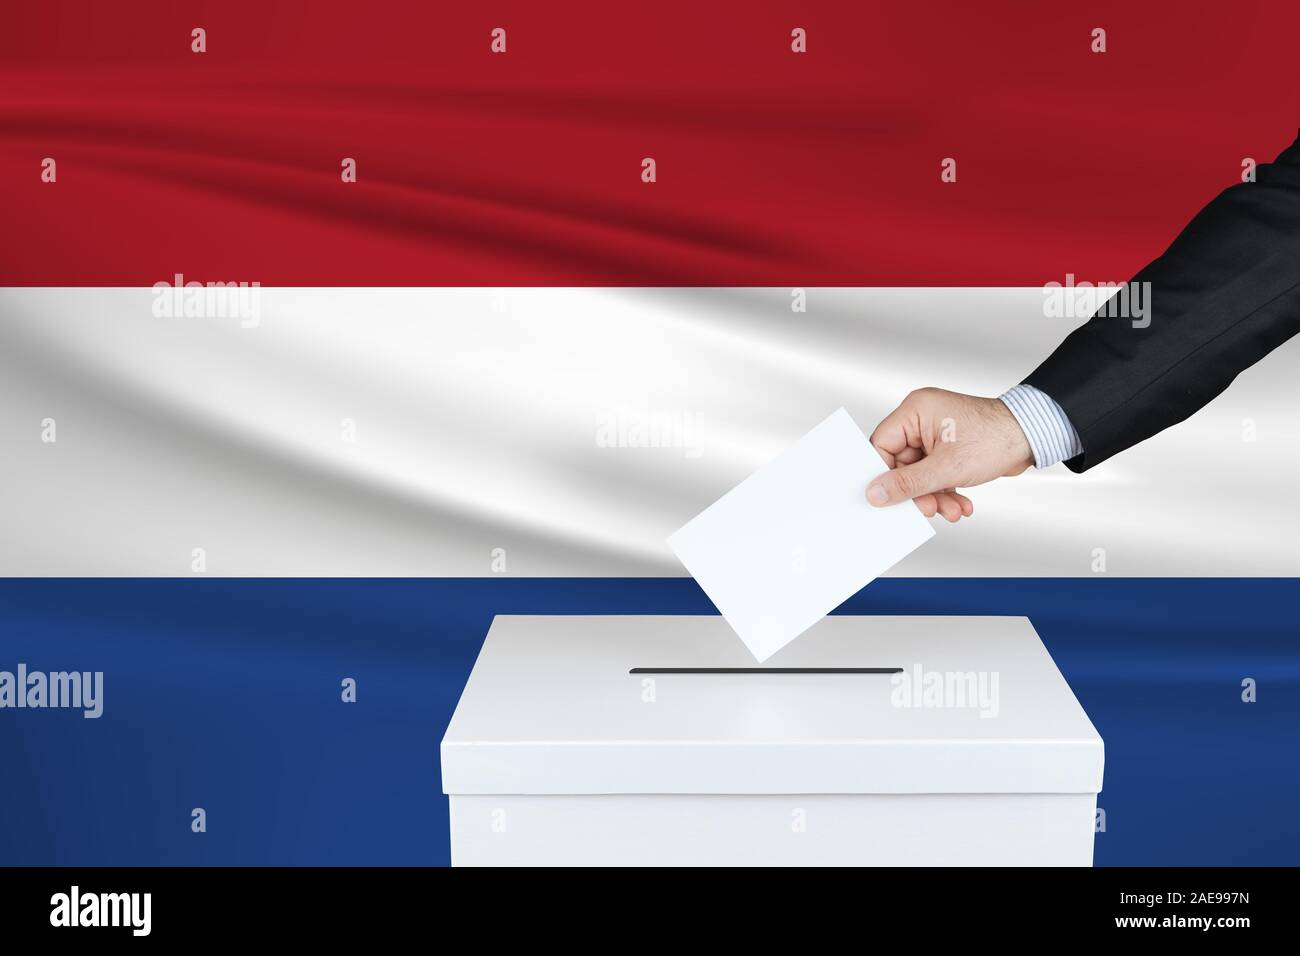 Election in Netherlands. The hand of man putting his vote in the ballot box. Waved Netherlands flag on background. Stock Photo